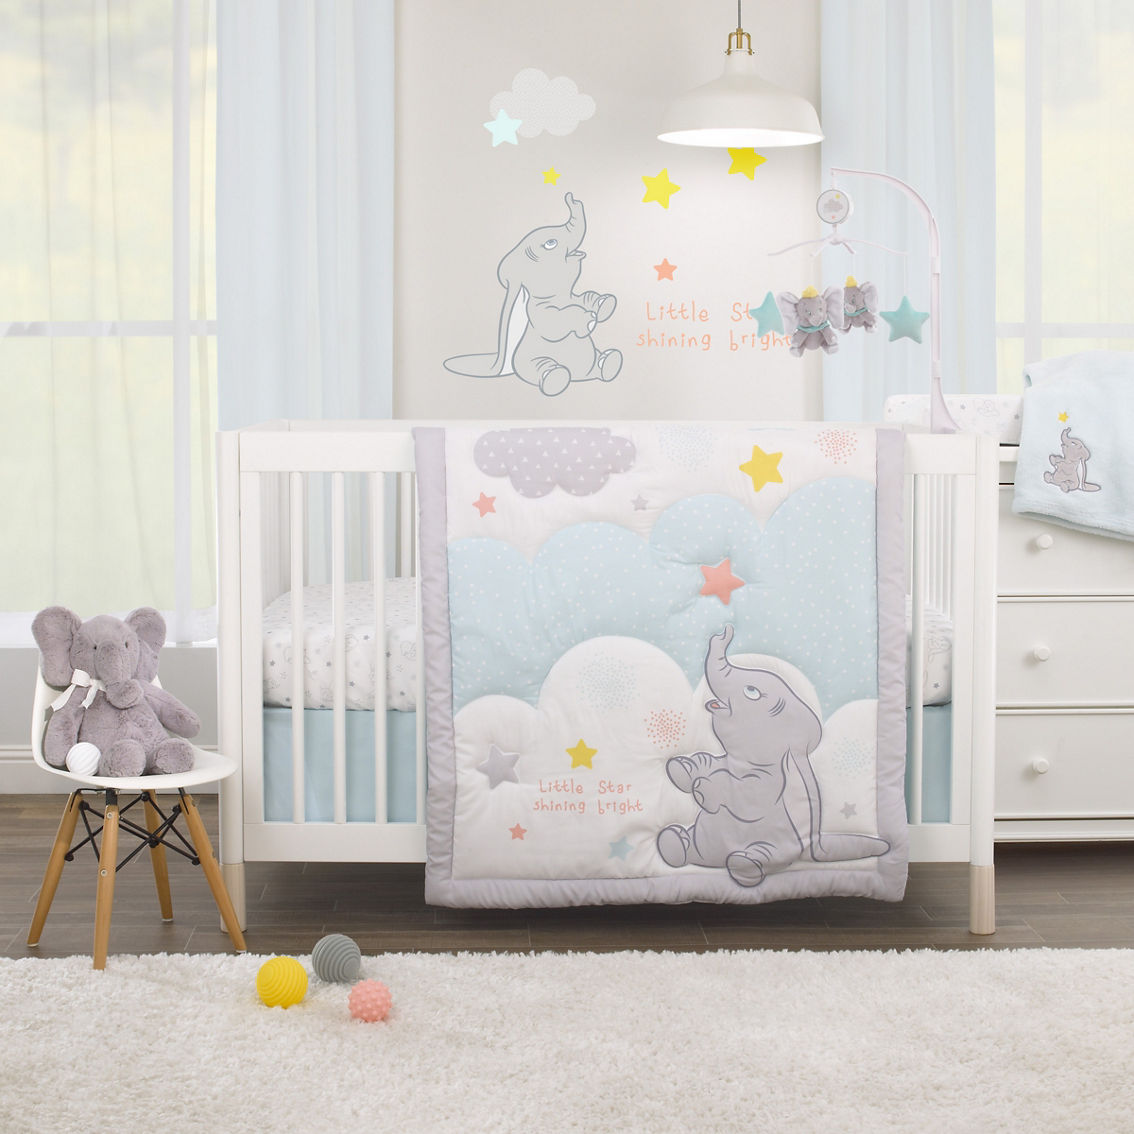 Disney Dumbo Shine Bright Little Star Aqua, Grey and White Changing Pad Cover - Image 3 of 3